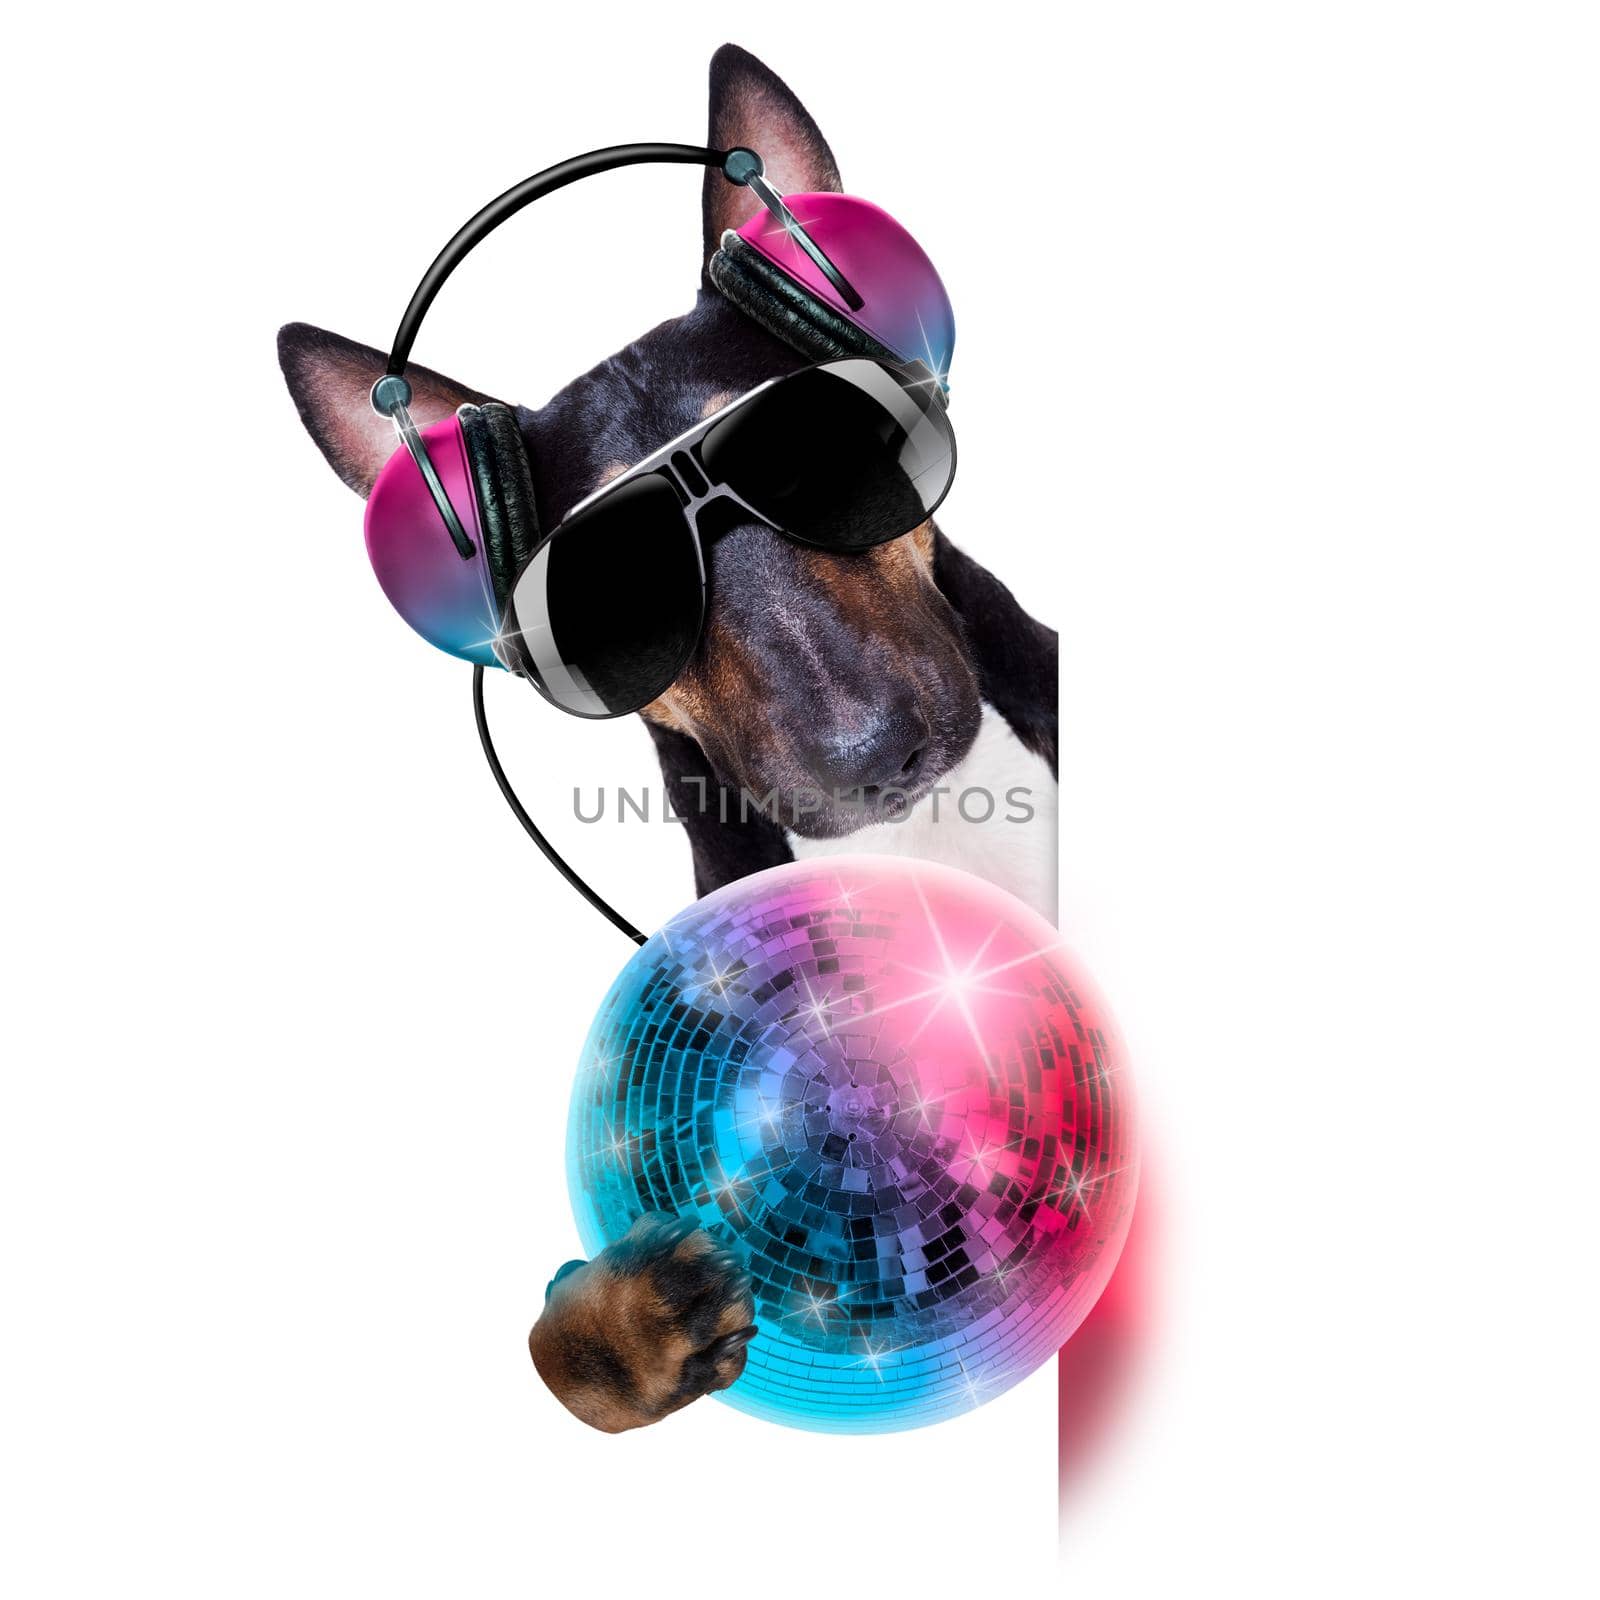 Dj bull terrier dog playing music in a club with disco ball , isolated on white background, behind banner or placard